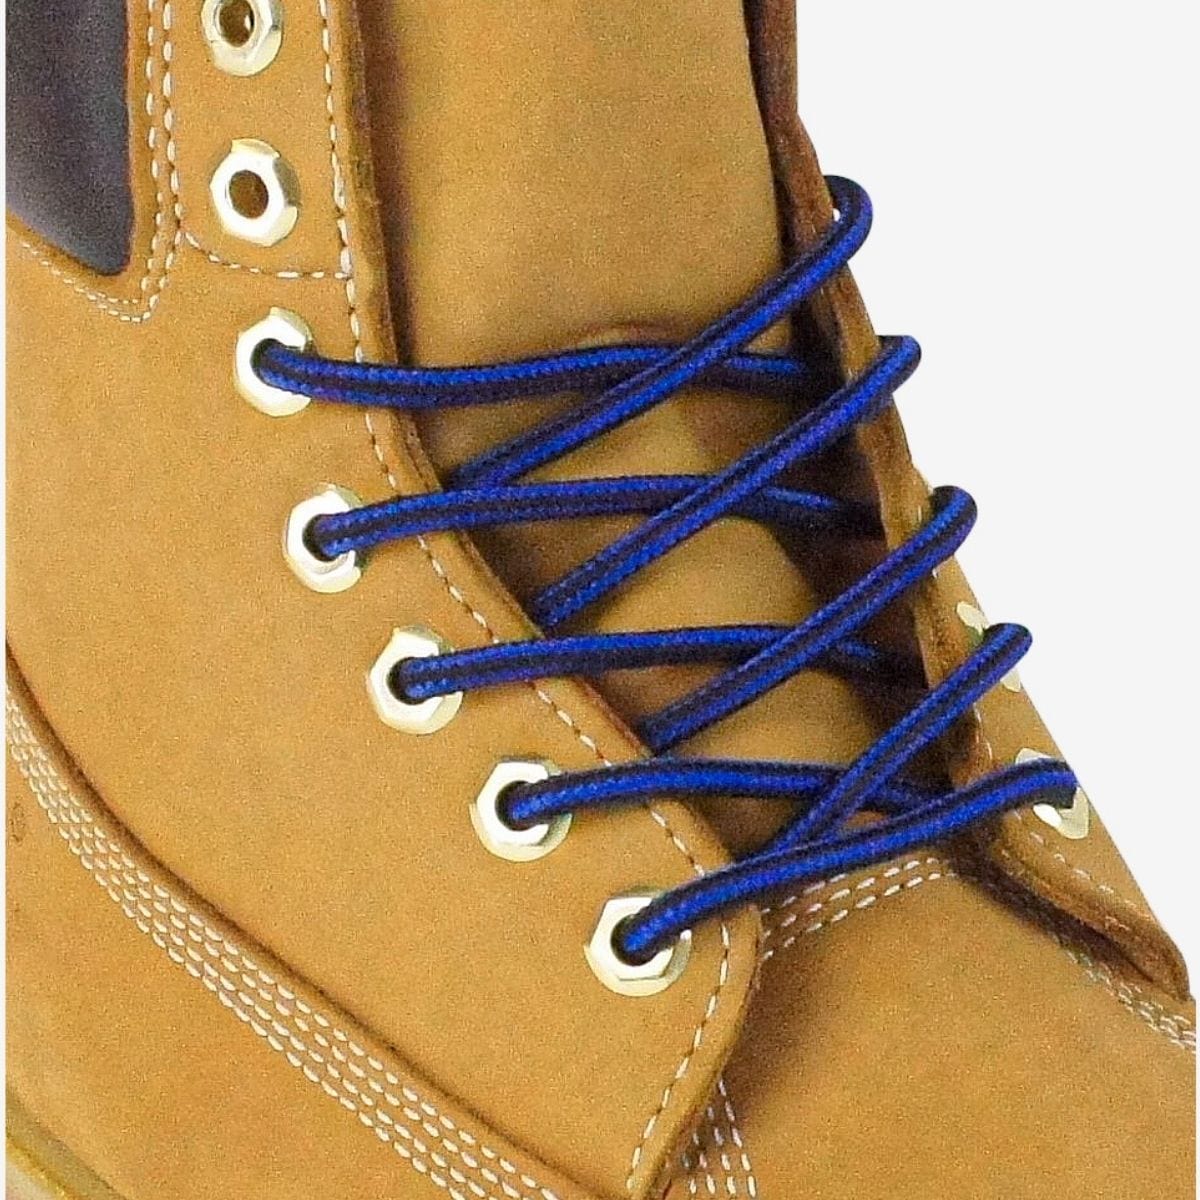 shop-round-shoelaces-online-in-blue-and-black-for-boots-sneakers-and-running-shoes